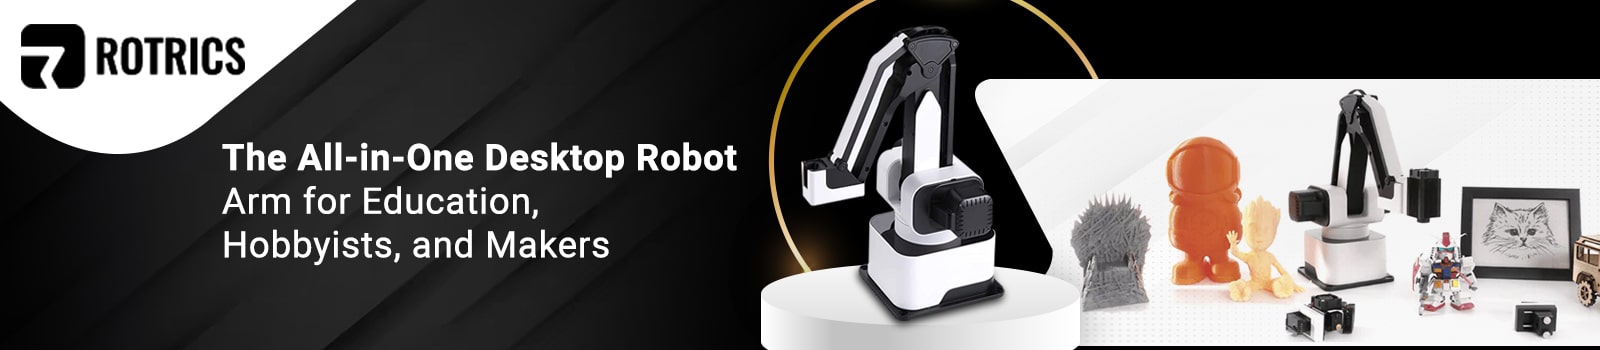 Rotrics Robotic Arm: The All-in-One Desktop Robot Arm for Education, Hobbyists, and Makers